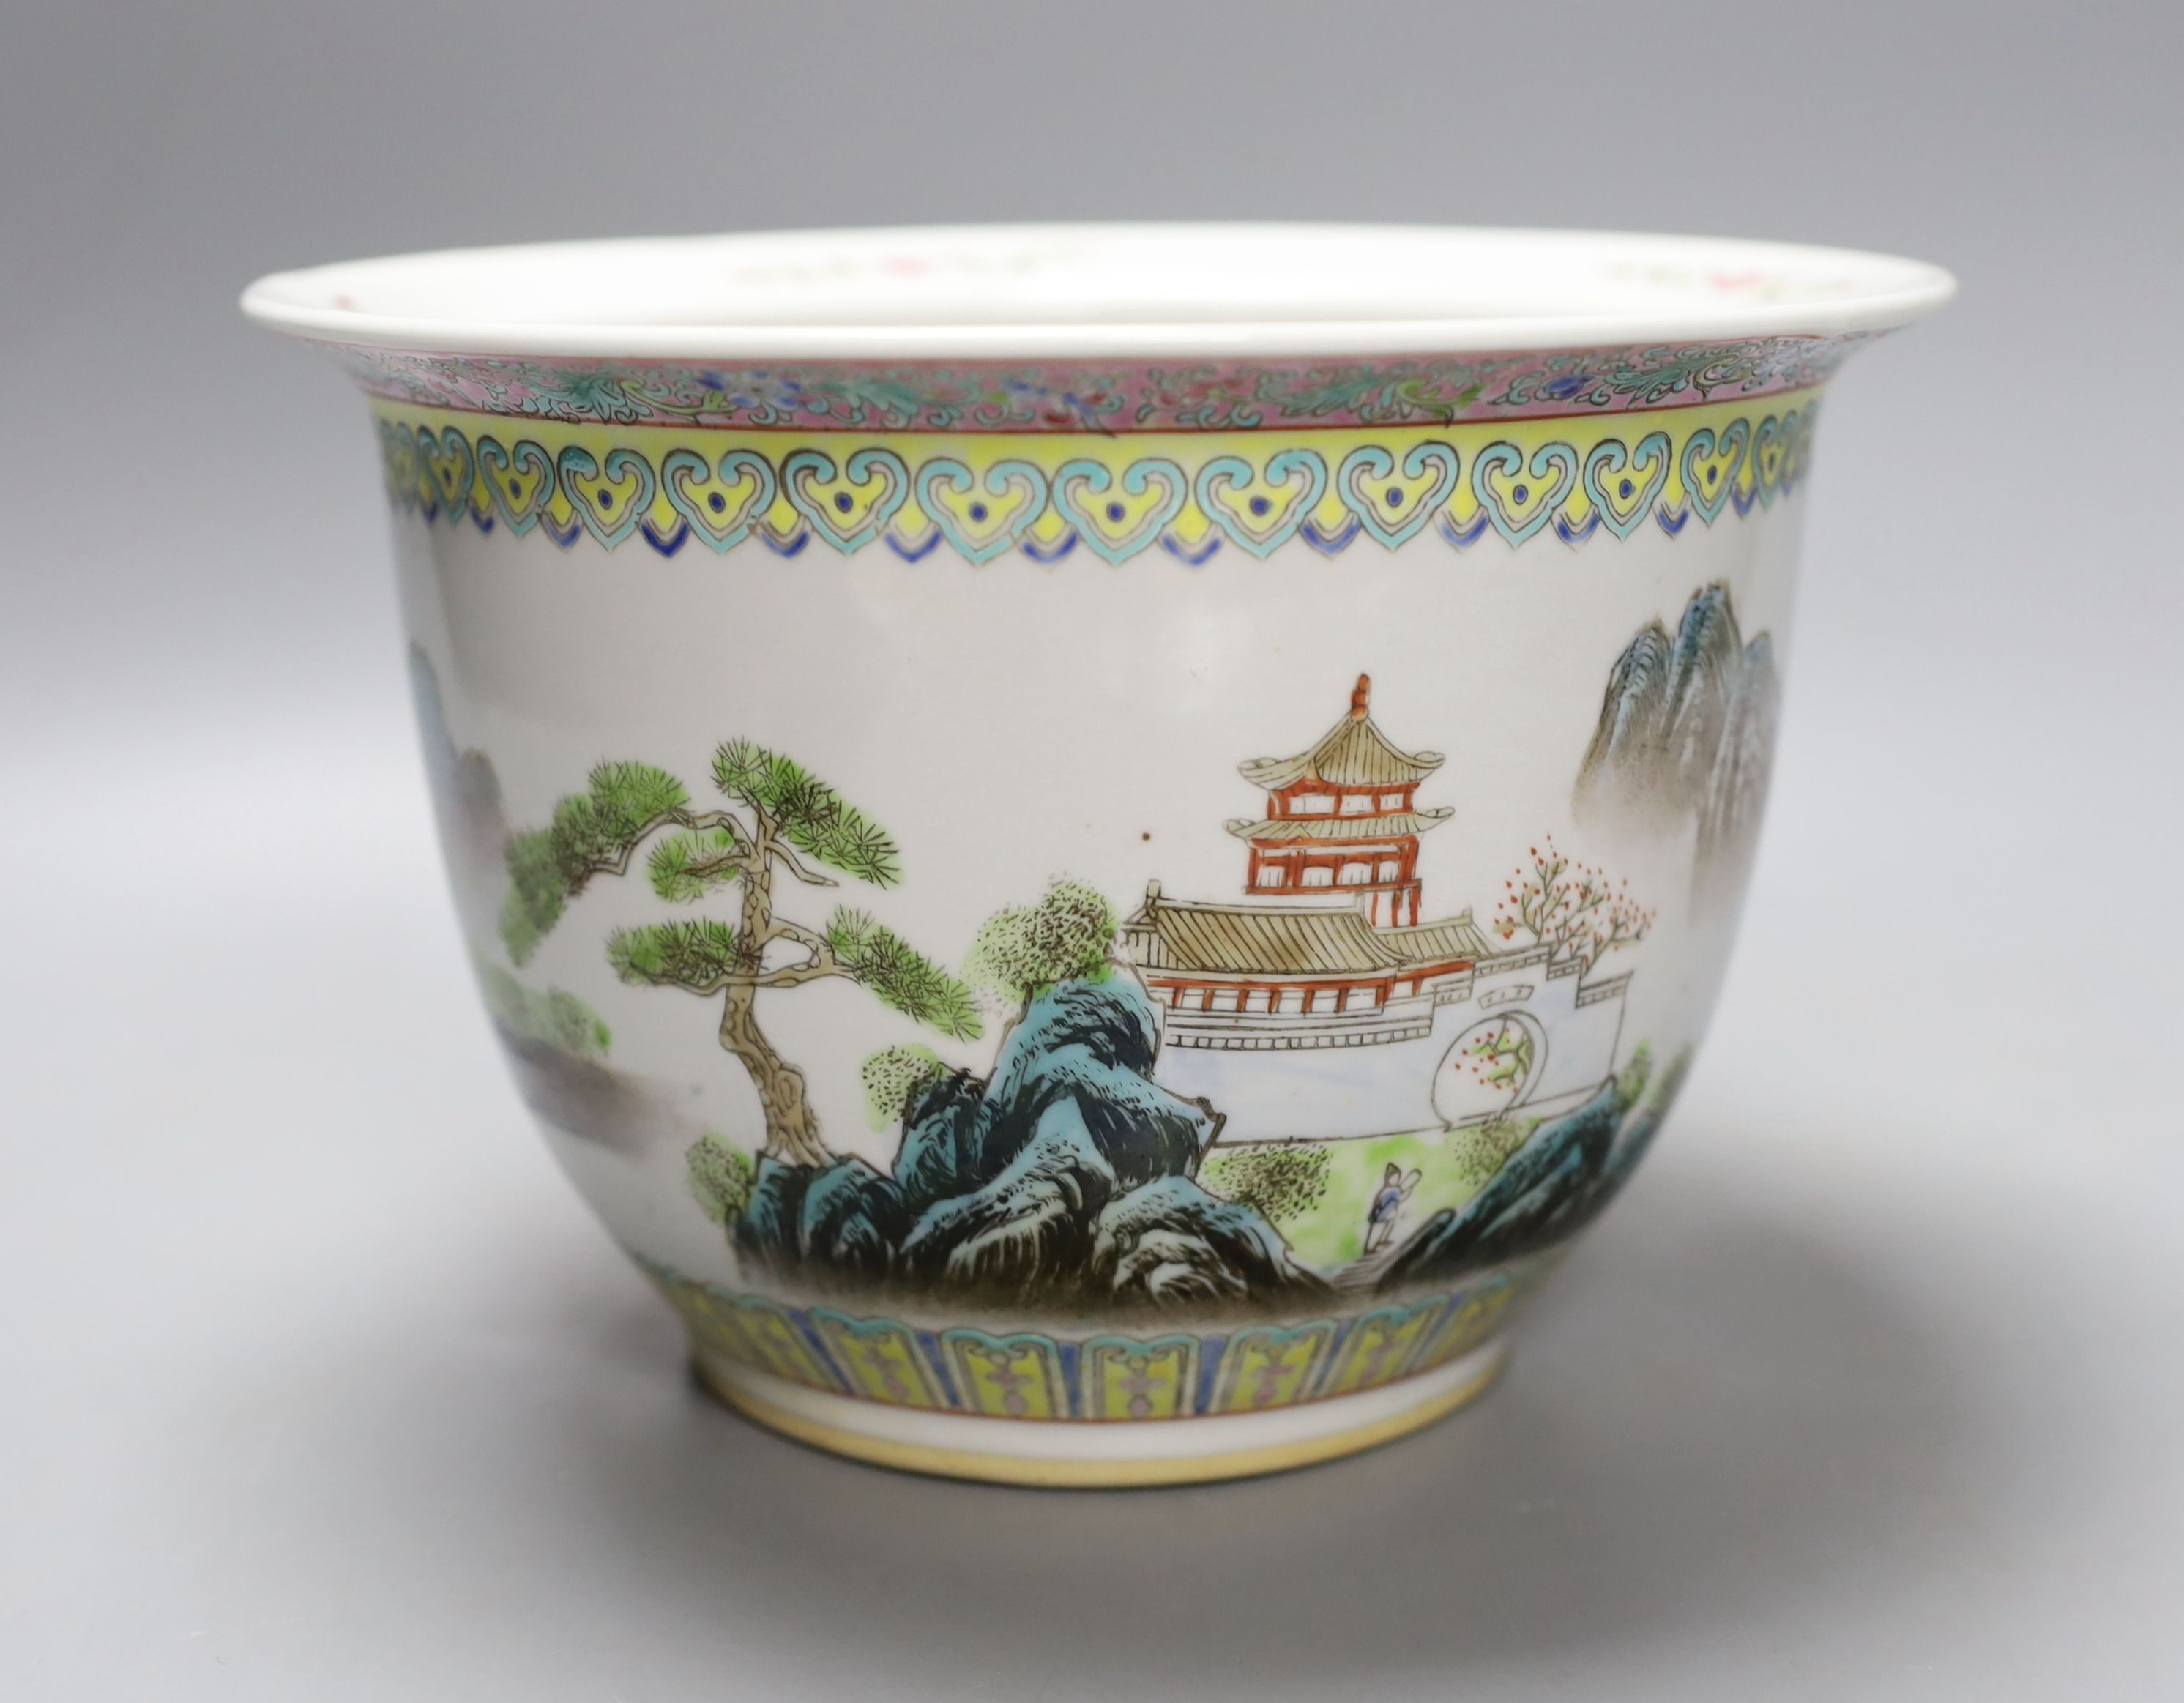 A mid 20th century Chinese famille rose plant pot - 14cm high